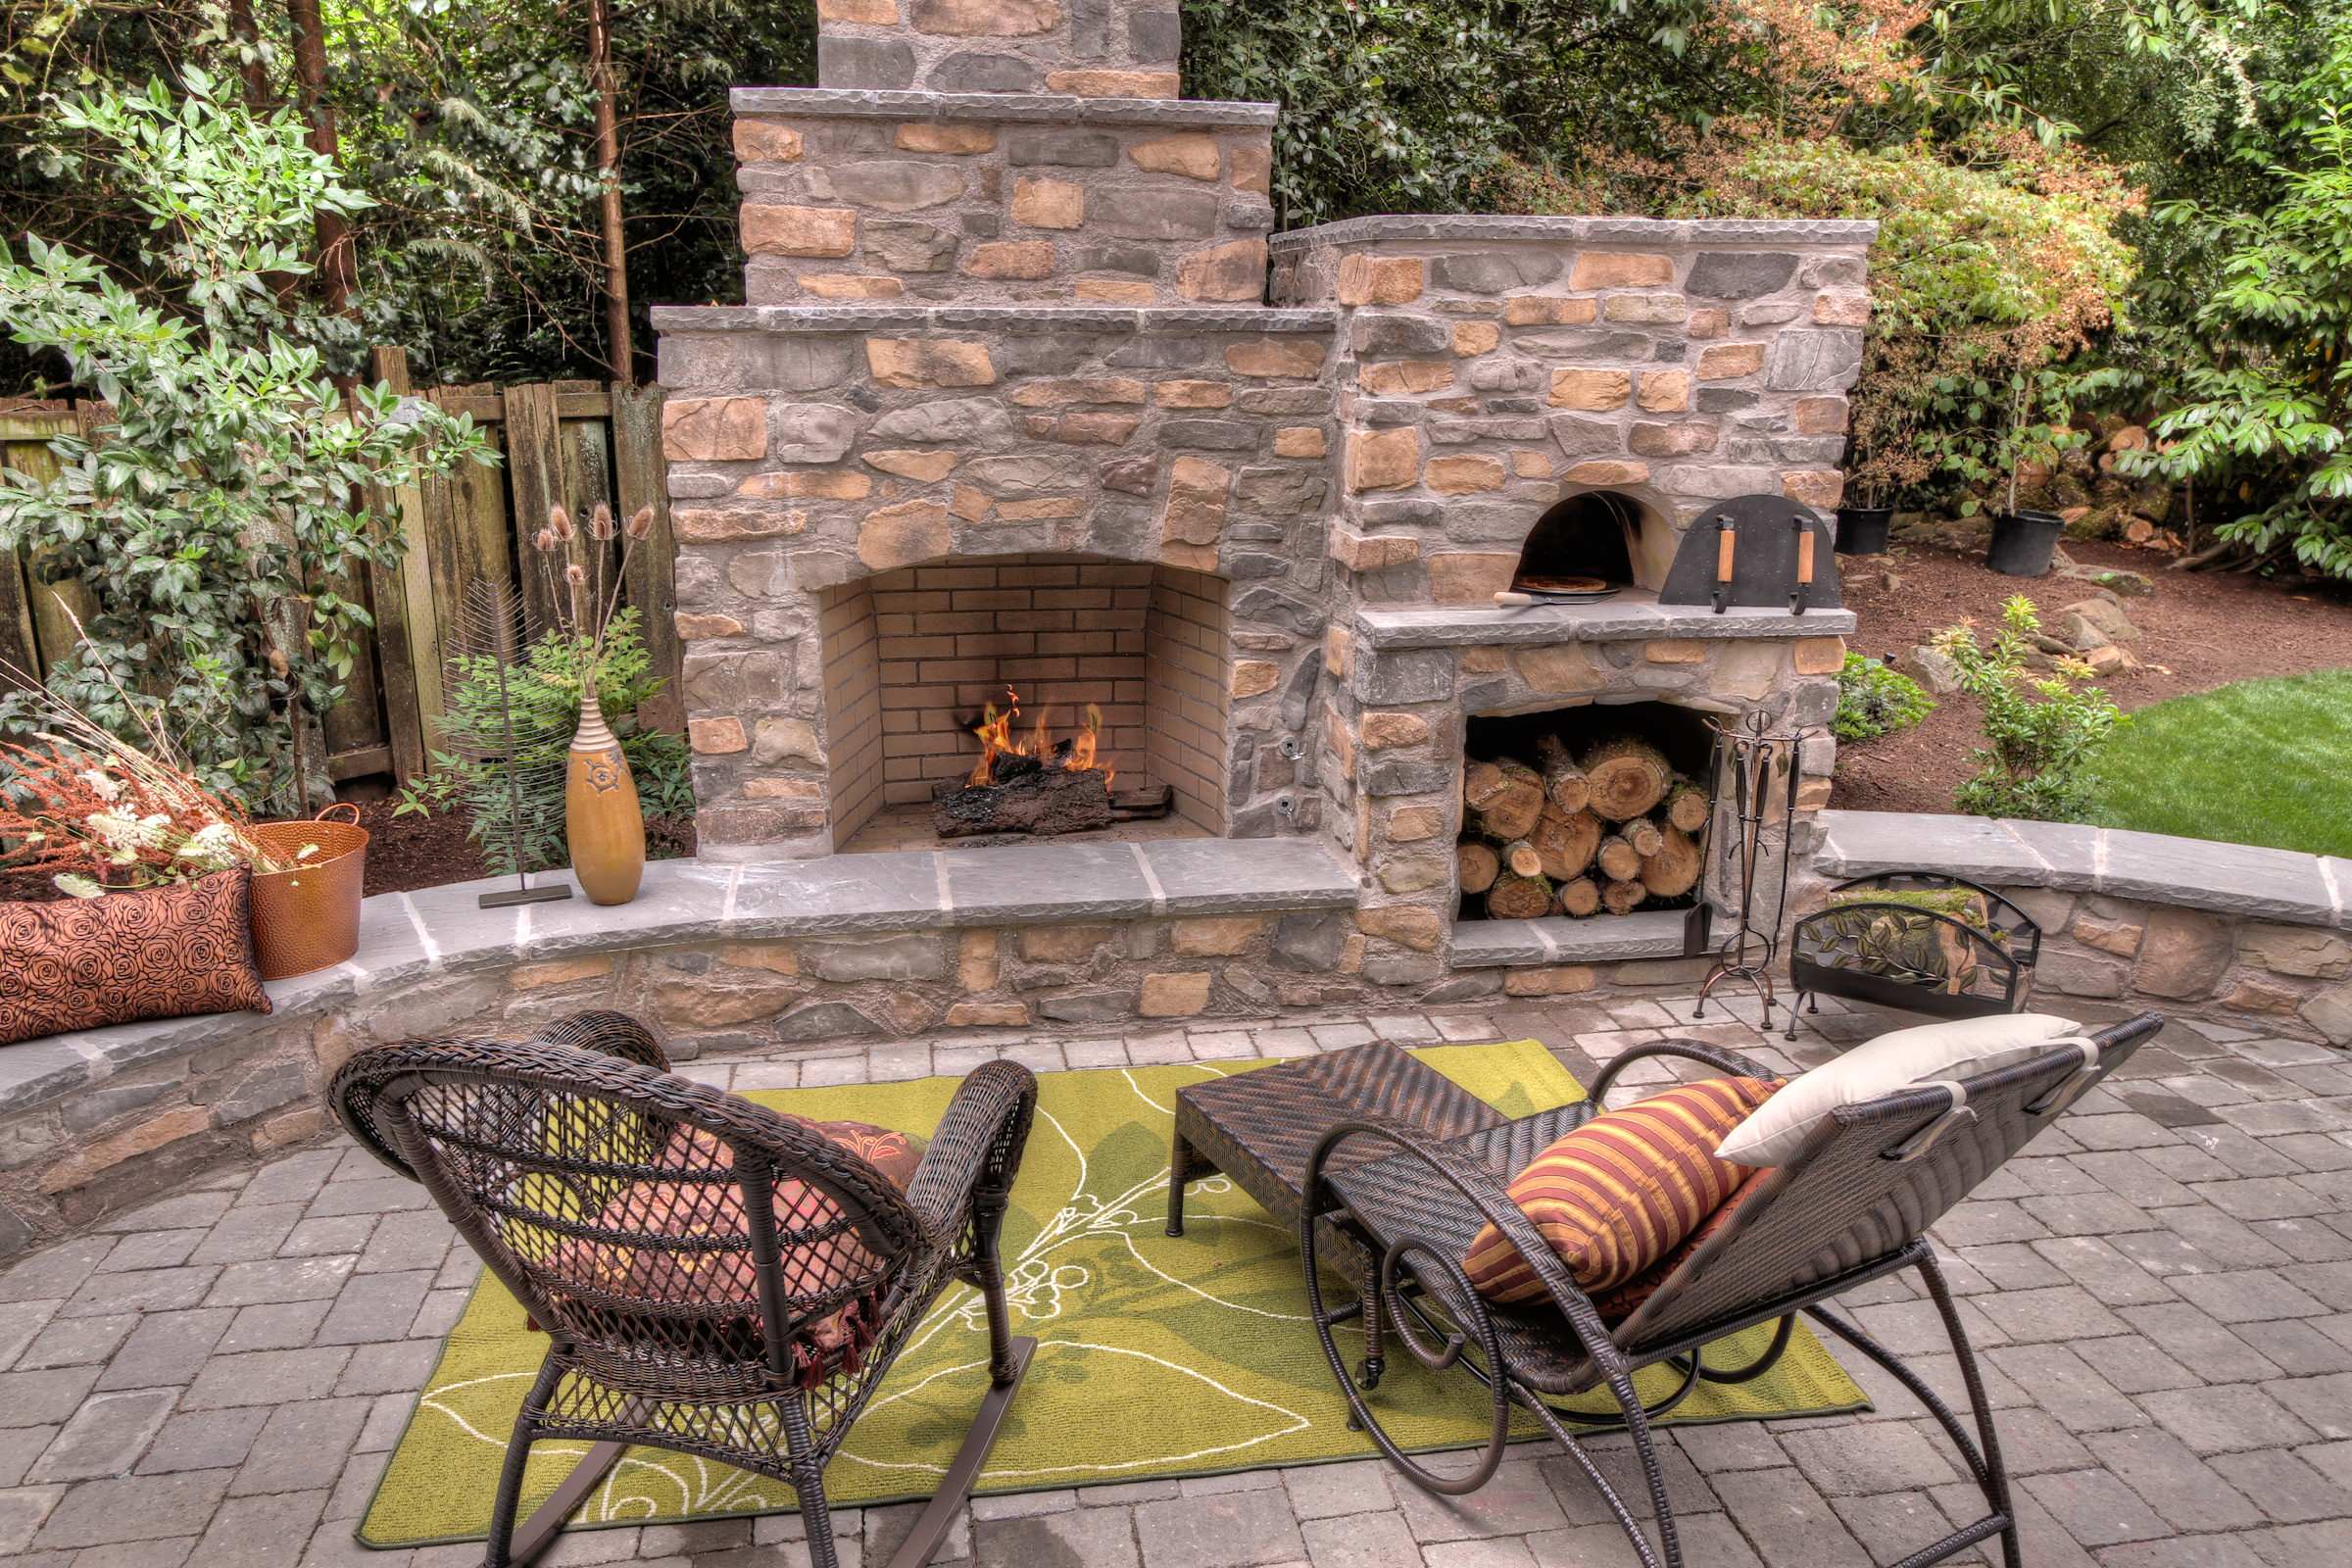 Outdoor Fireplace With Pizza Oven, How To Repair A Stone Outdoor Fireplace